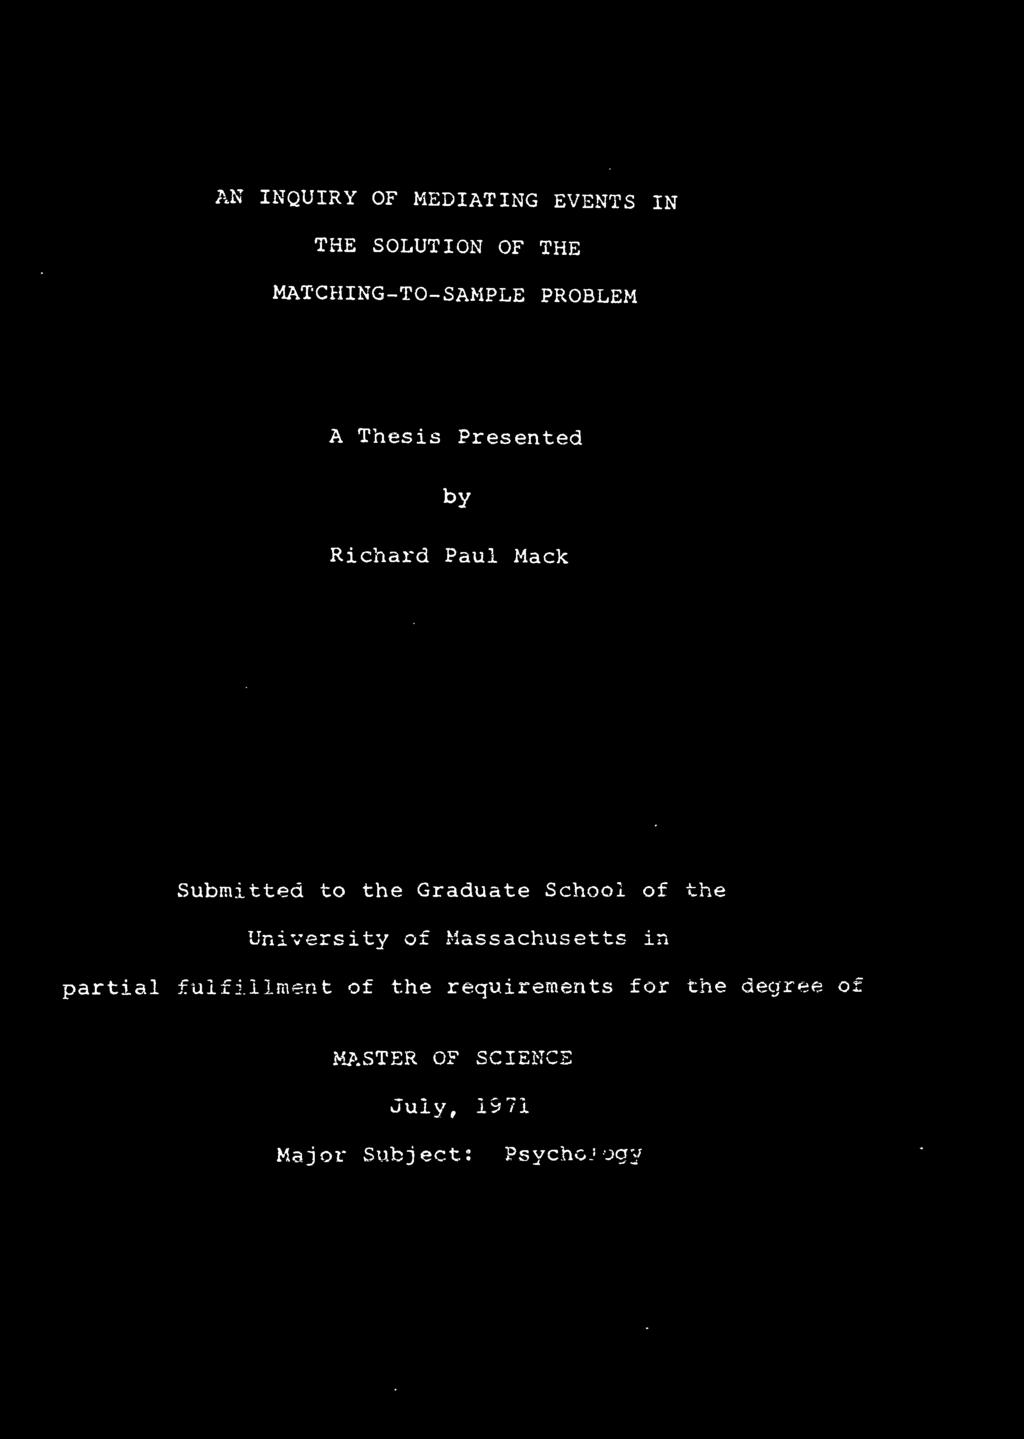 AN INQUIRY OF MEDIATING EVENTS IN THE SOLUTION OF THE MATCHING-TO- SAMPLE PROBLEM A Thesis Presented by Richard Paul Mack Submitted to the Graduate